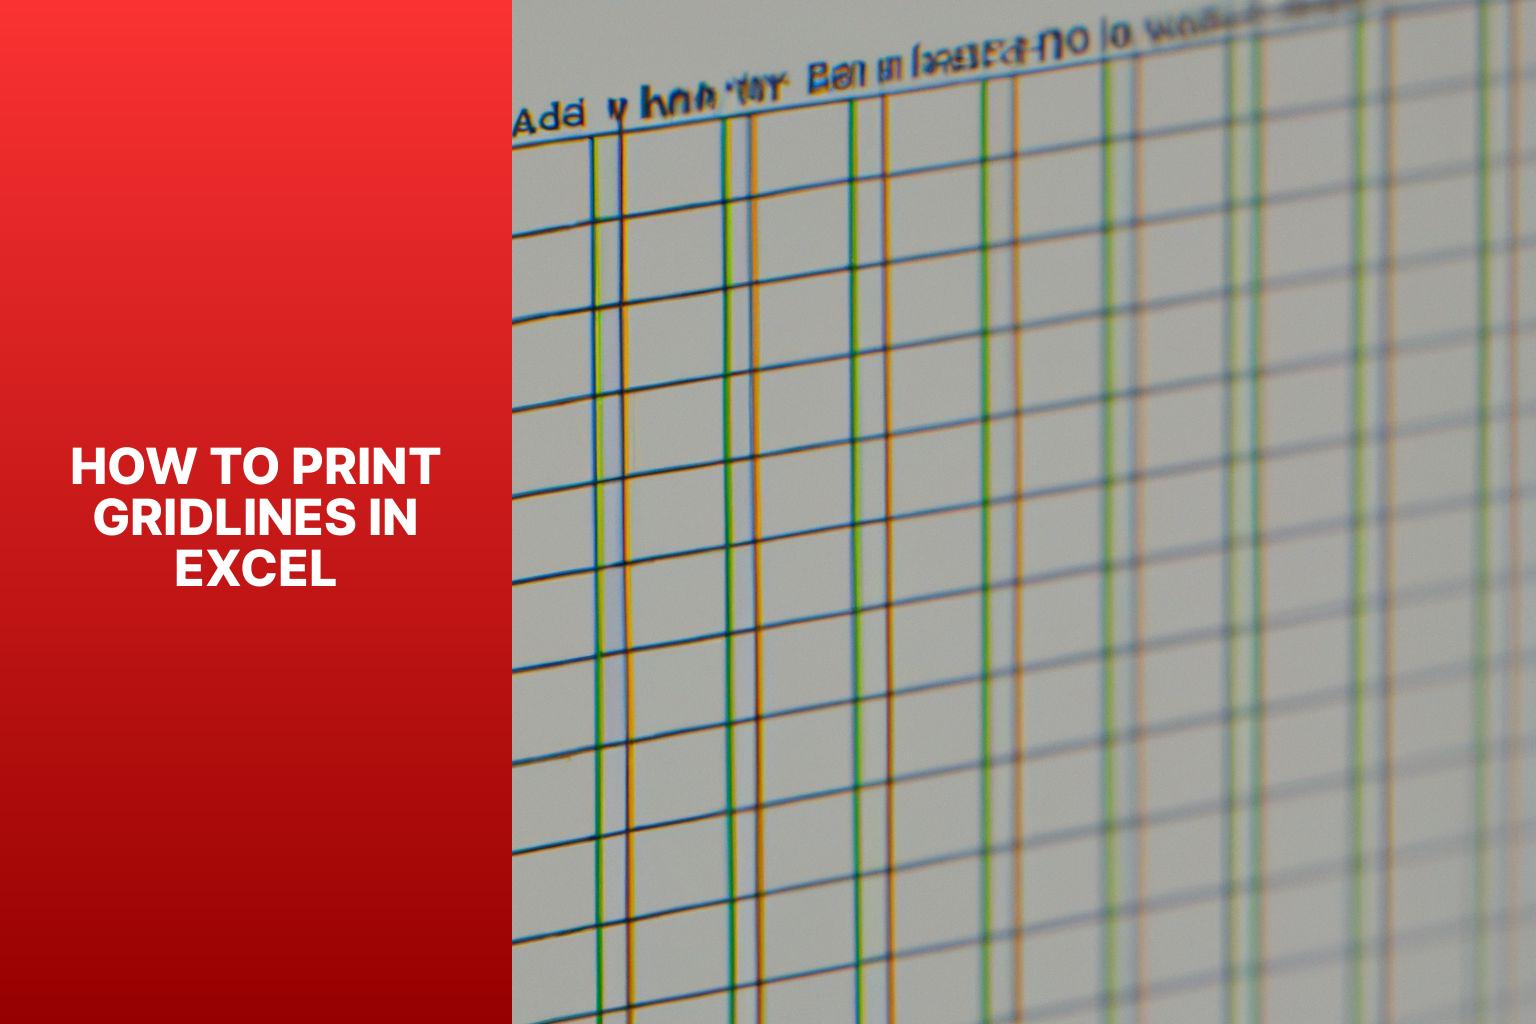 A Step-by-Step Guide on How to Print Gridlines in Excel